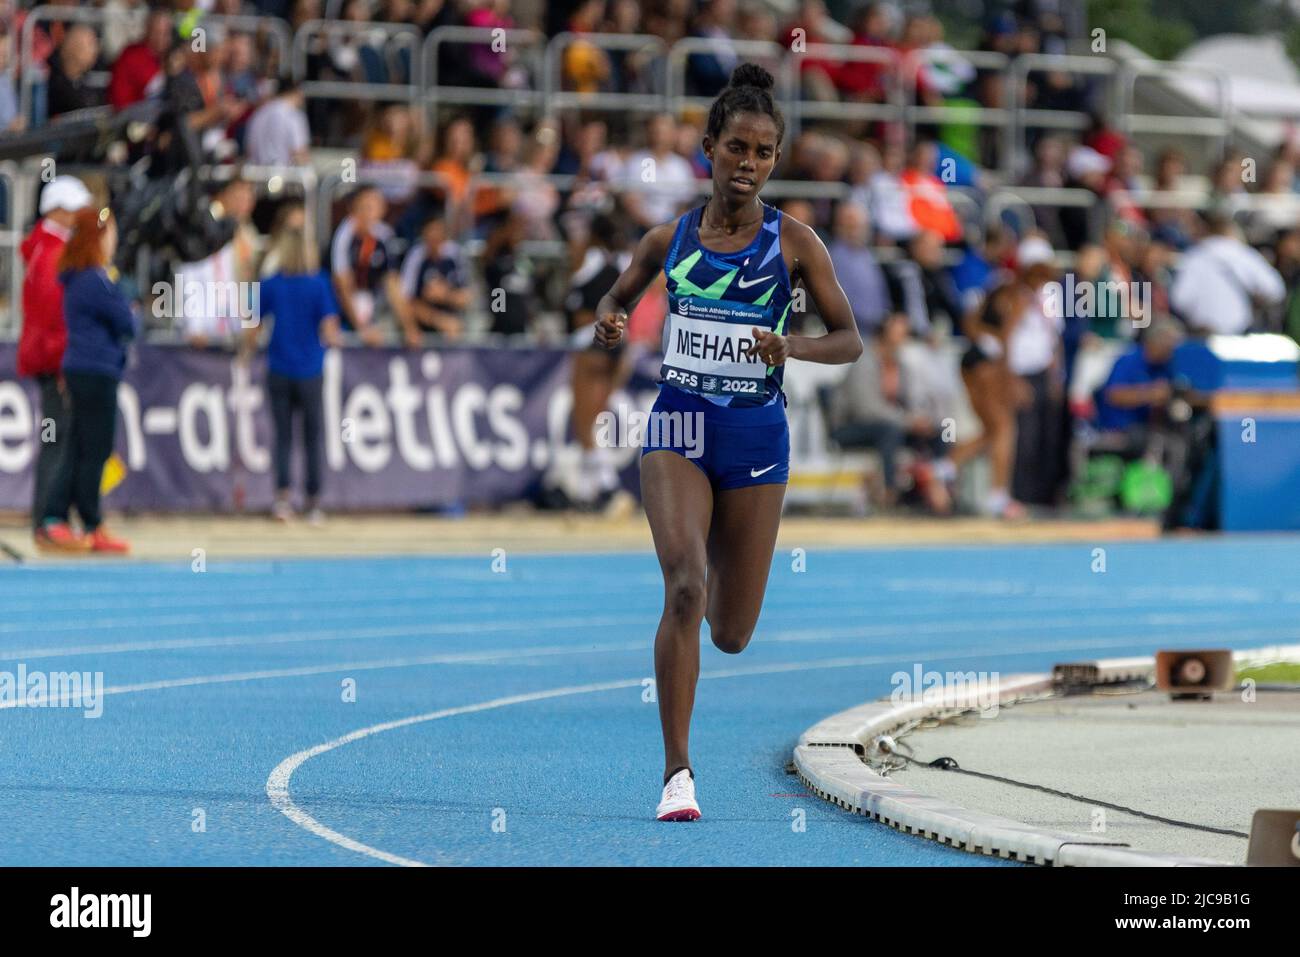 Ethiopian runner Hiwot Mehari competes in the Women's 5000 metres at the P-T-S athletics meeting in the sports site of x-bionic sphere® in Šamorín, Slovakia, 9. June 2022 Stock Photo